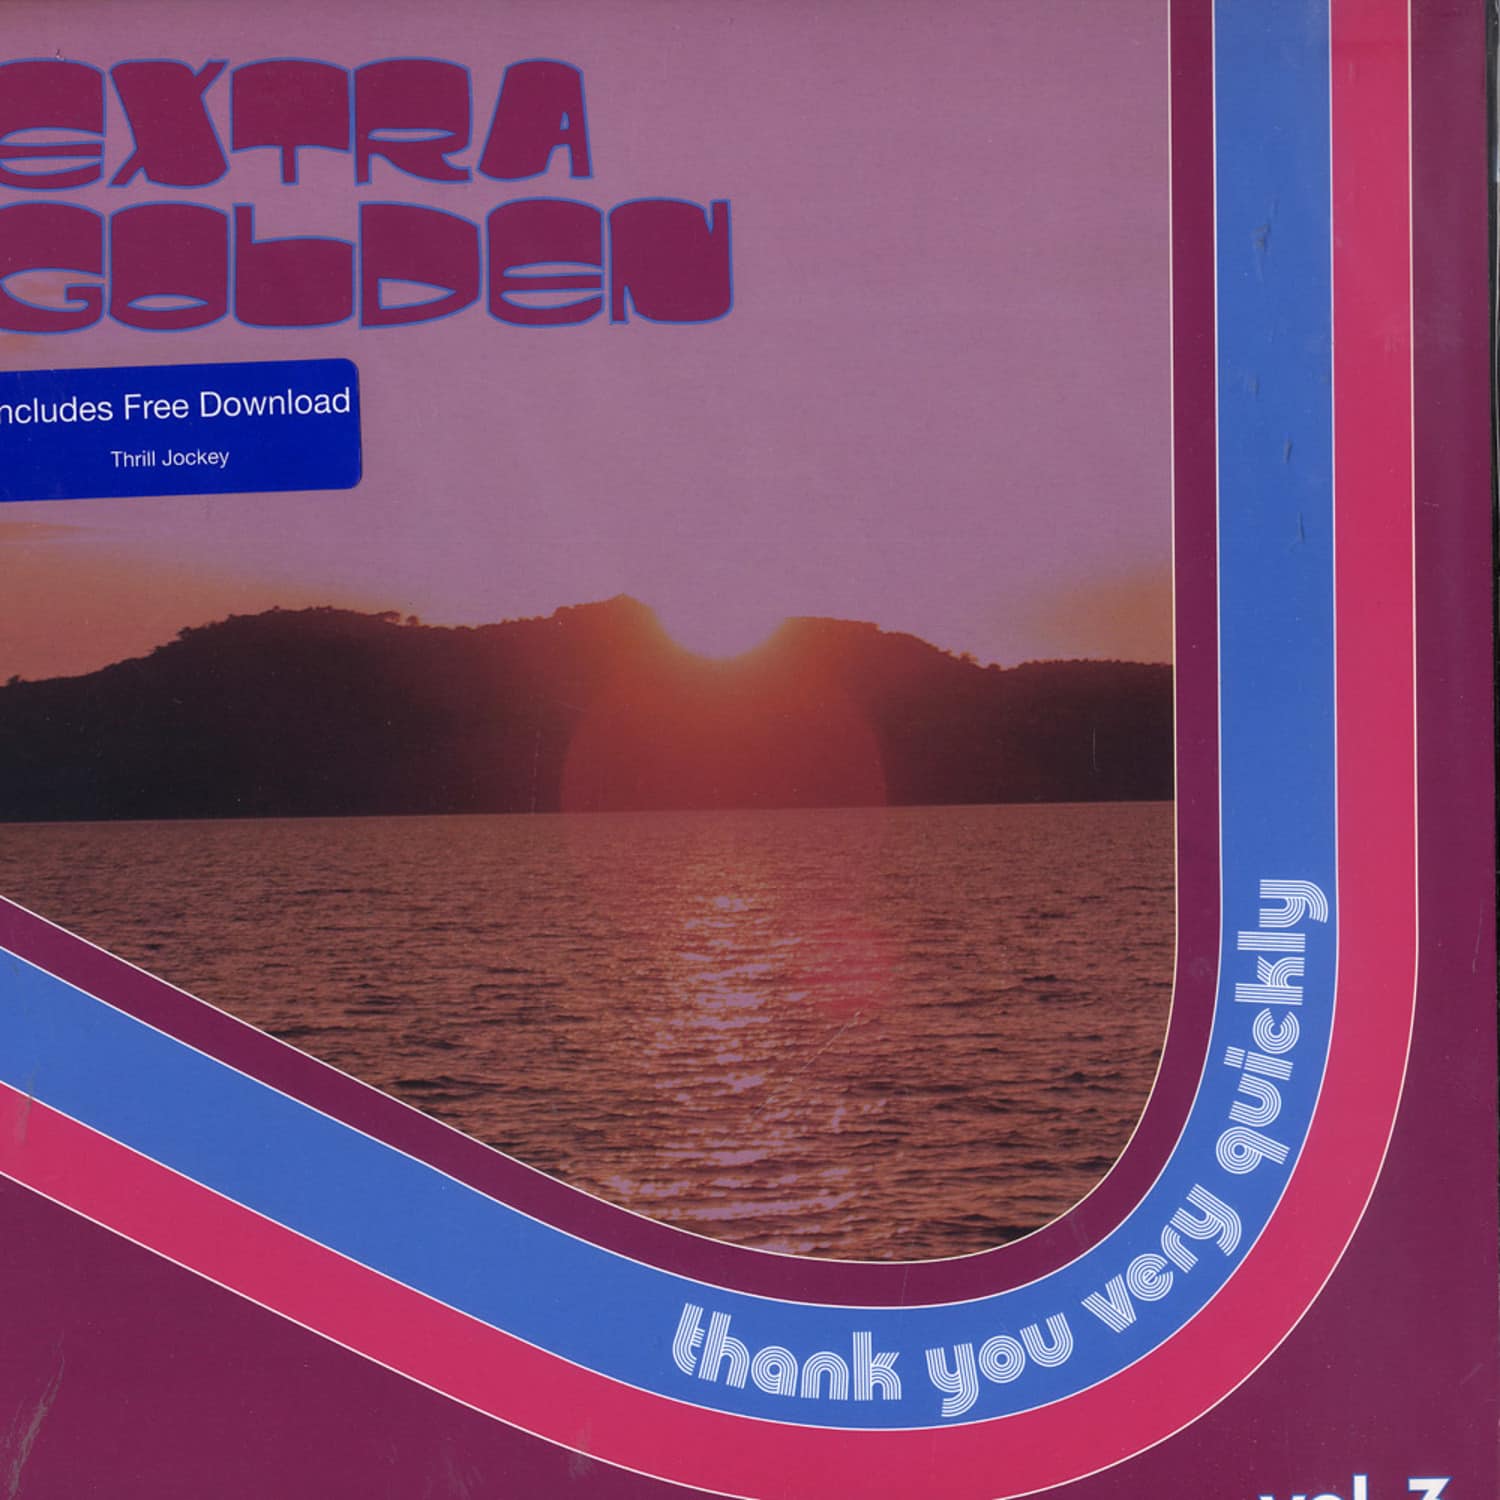 Extra Golden - THANK YOU VERY QUICKLY